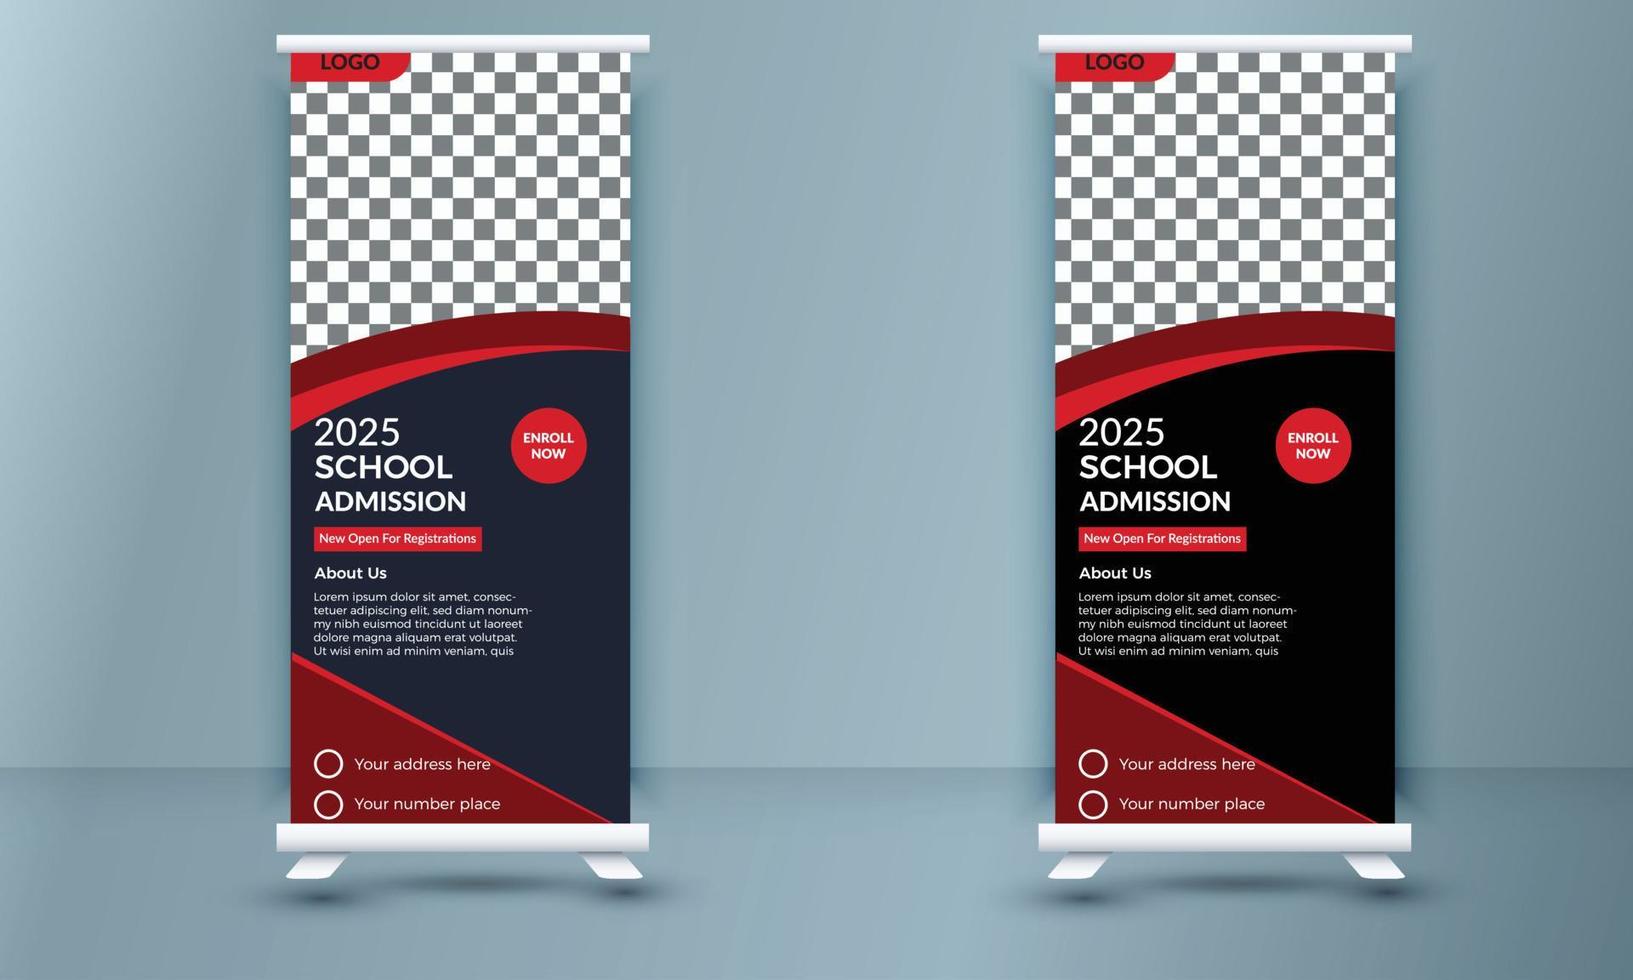 Kids school admission roll up banner template, school admission roll up banner design for school, college, university, coaching center template design vector